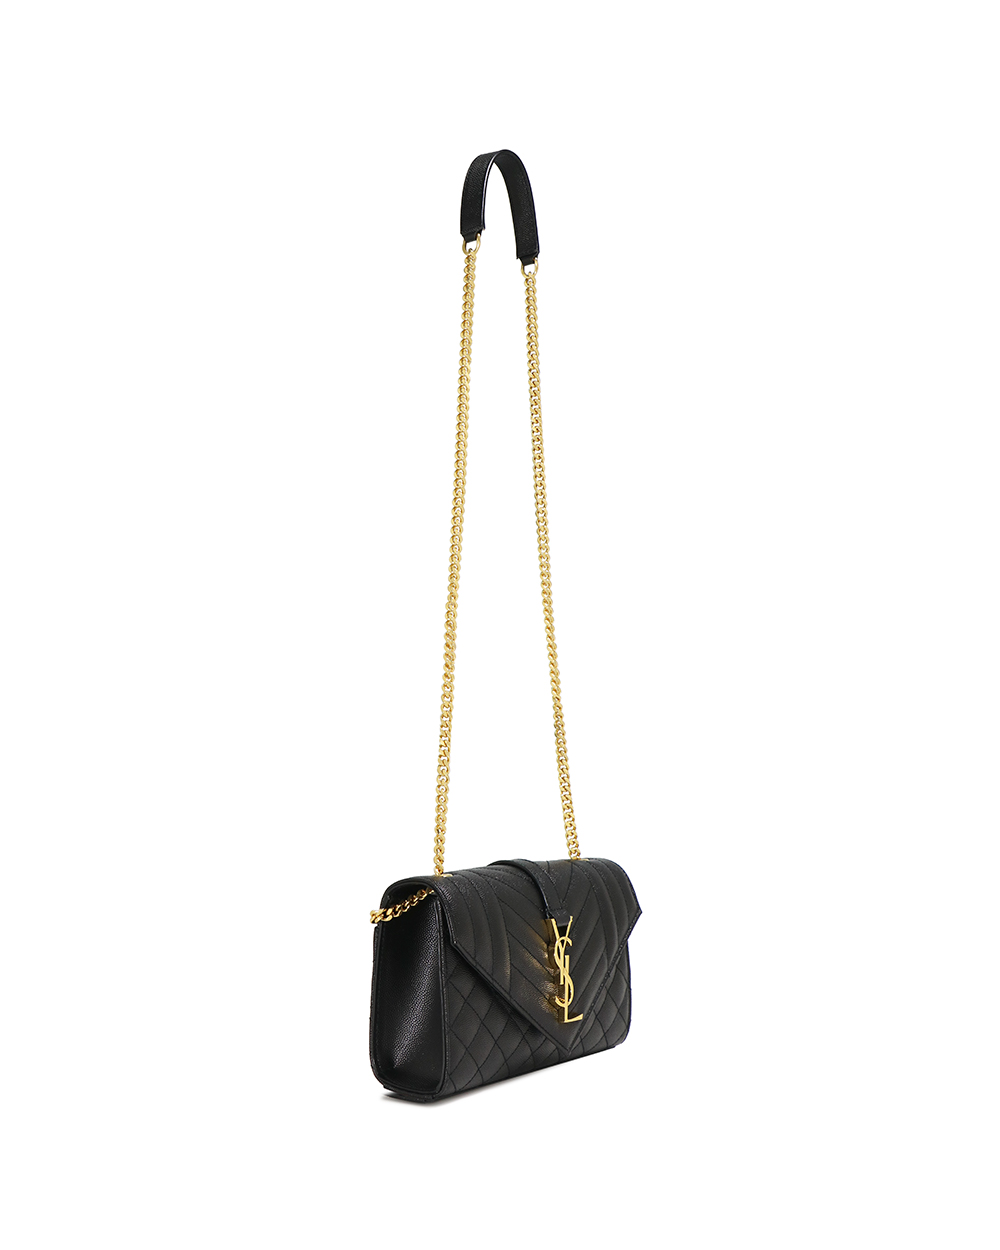 YSL BAG 600195 BOW91 1000 – Love For Lux